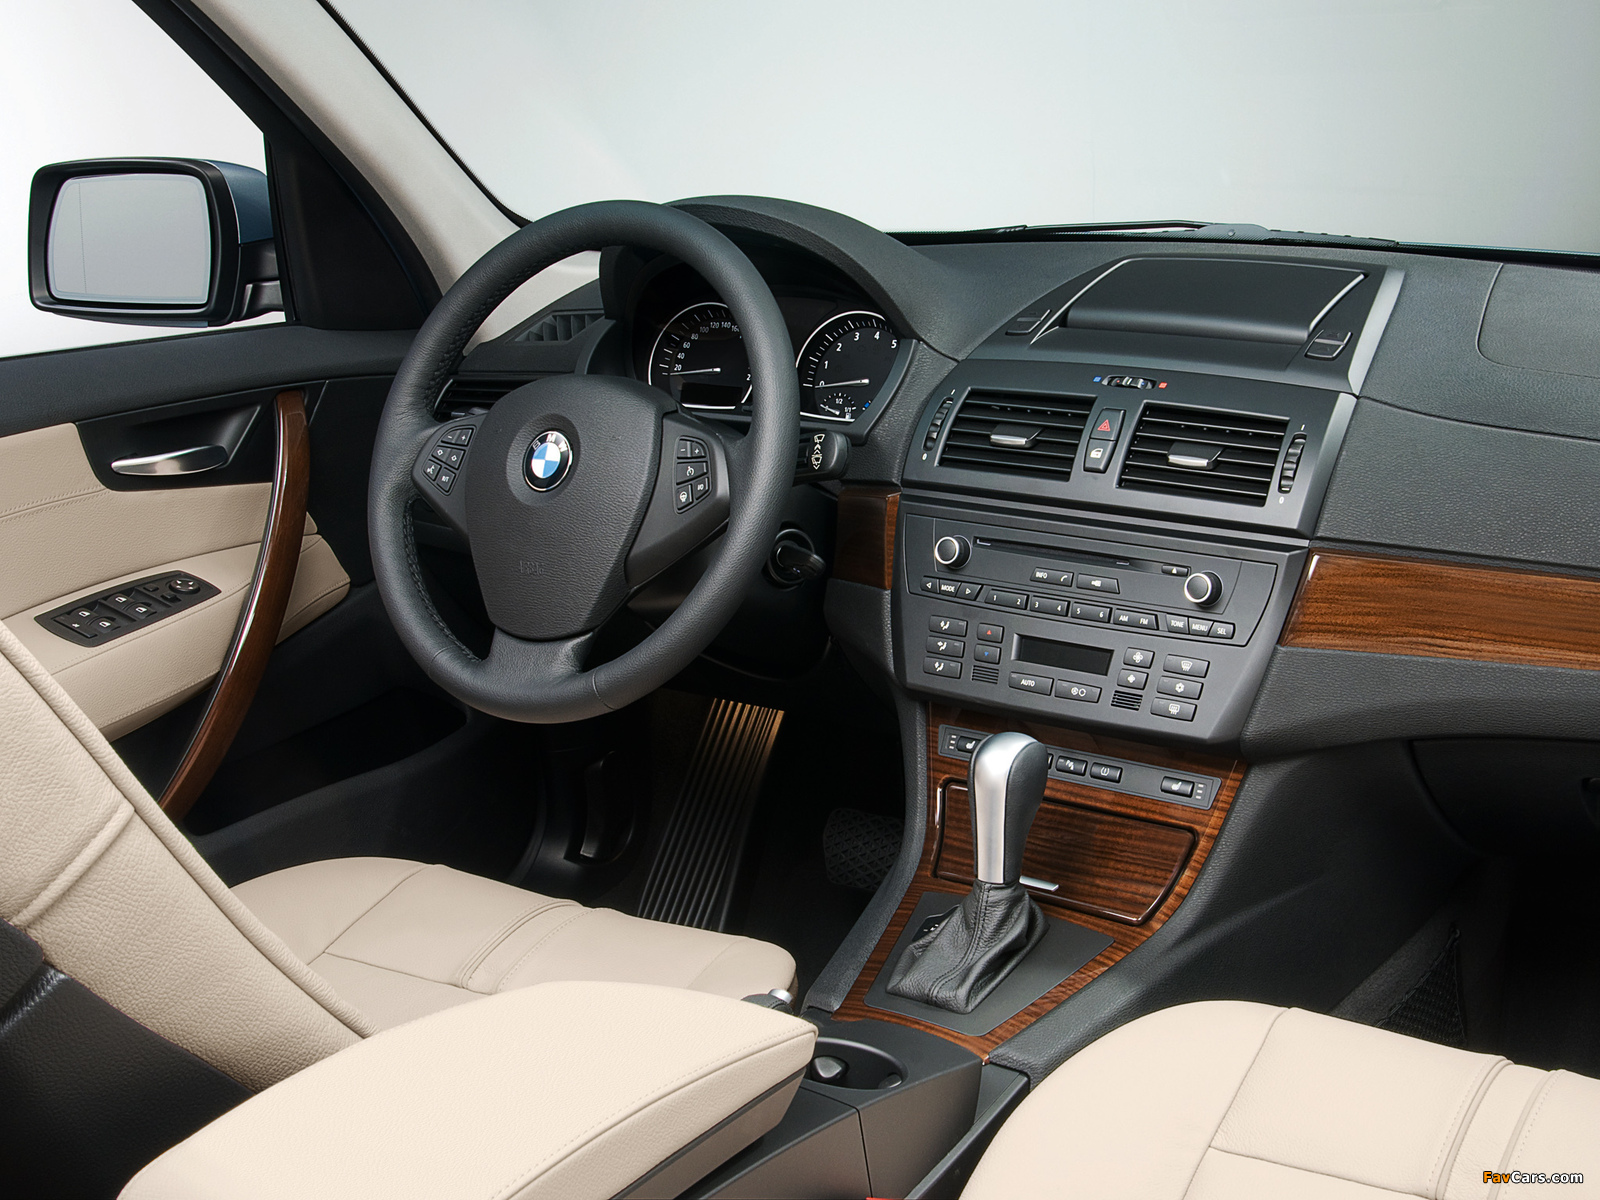 BMW X3 xDrive30i Exclusive Edition (E83) 2008 images (1600 x 1200)